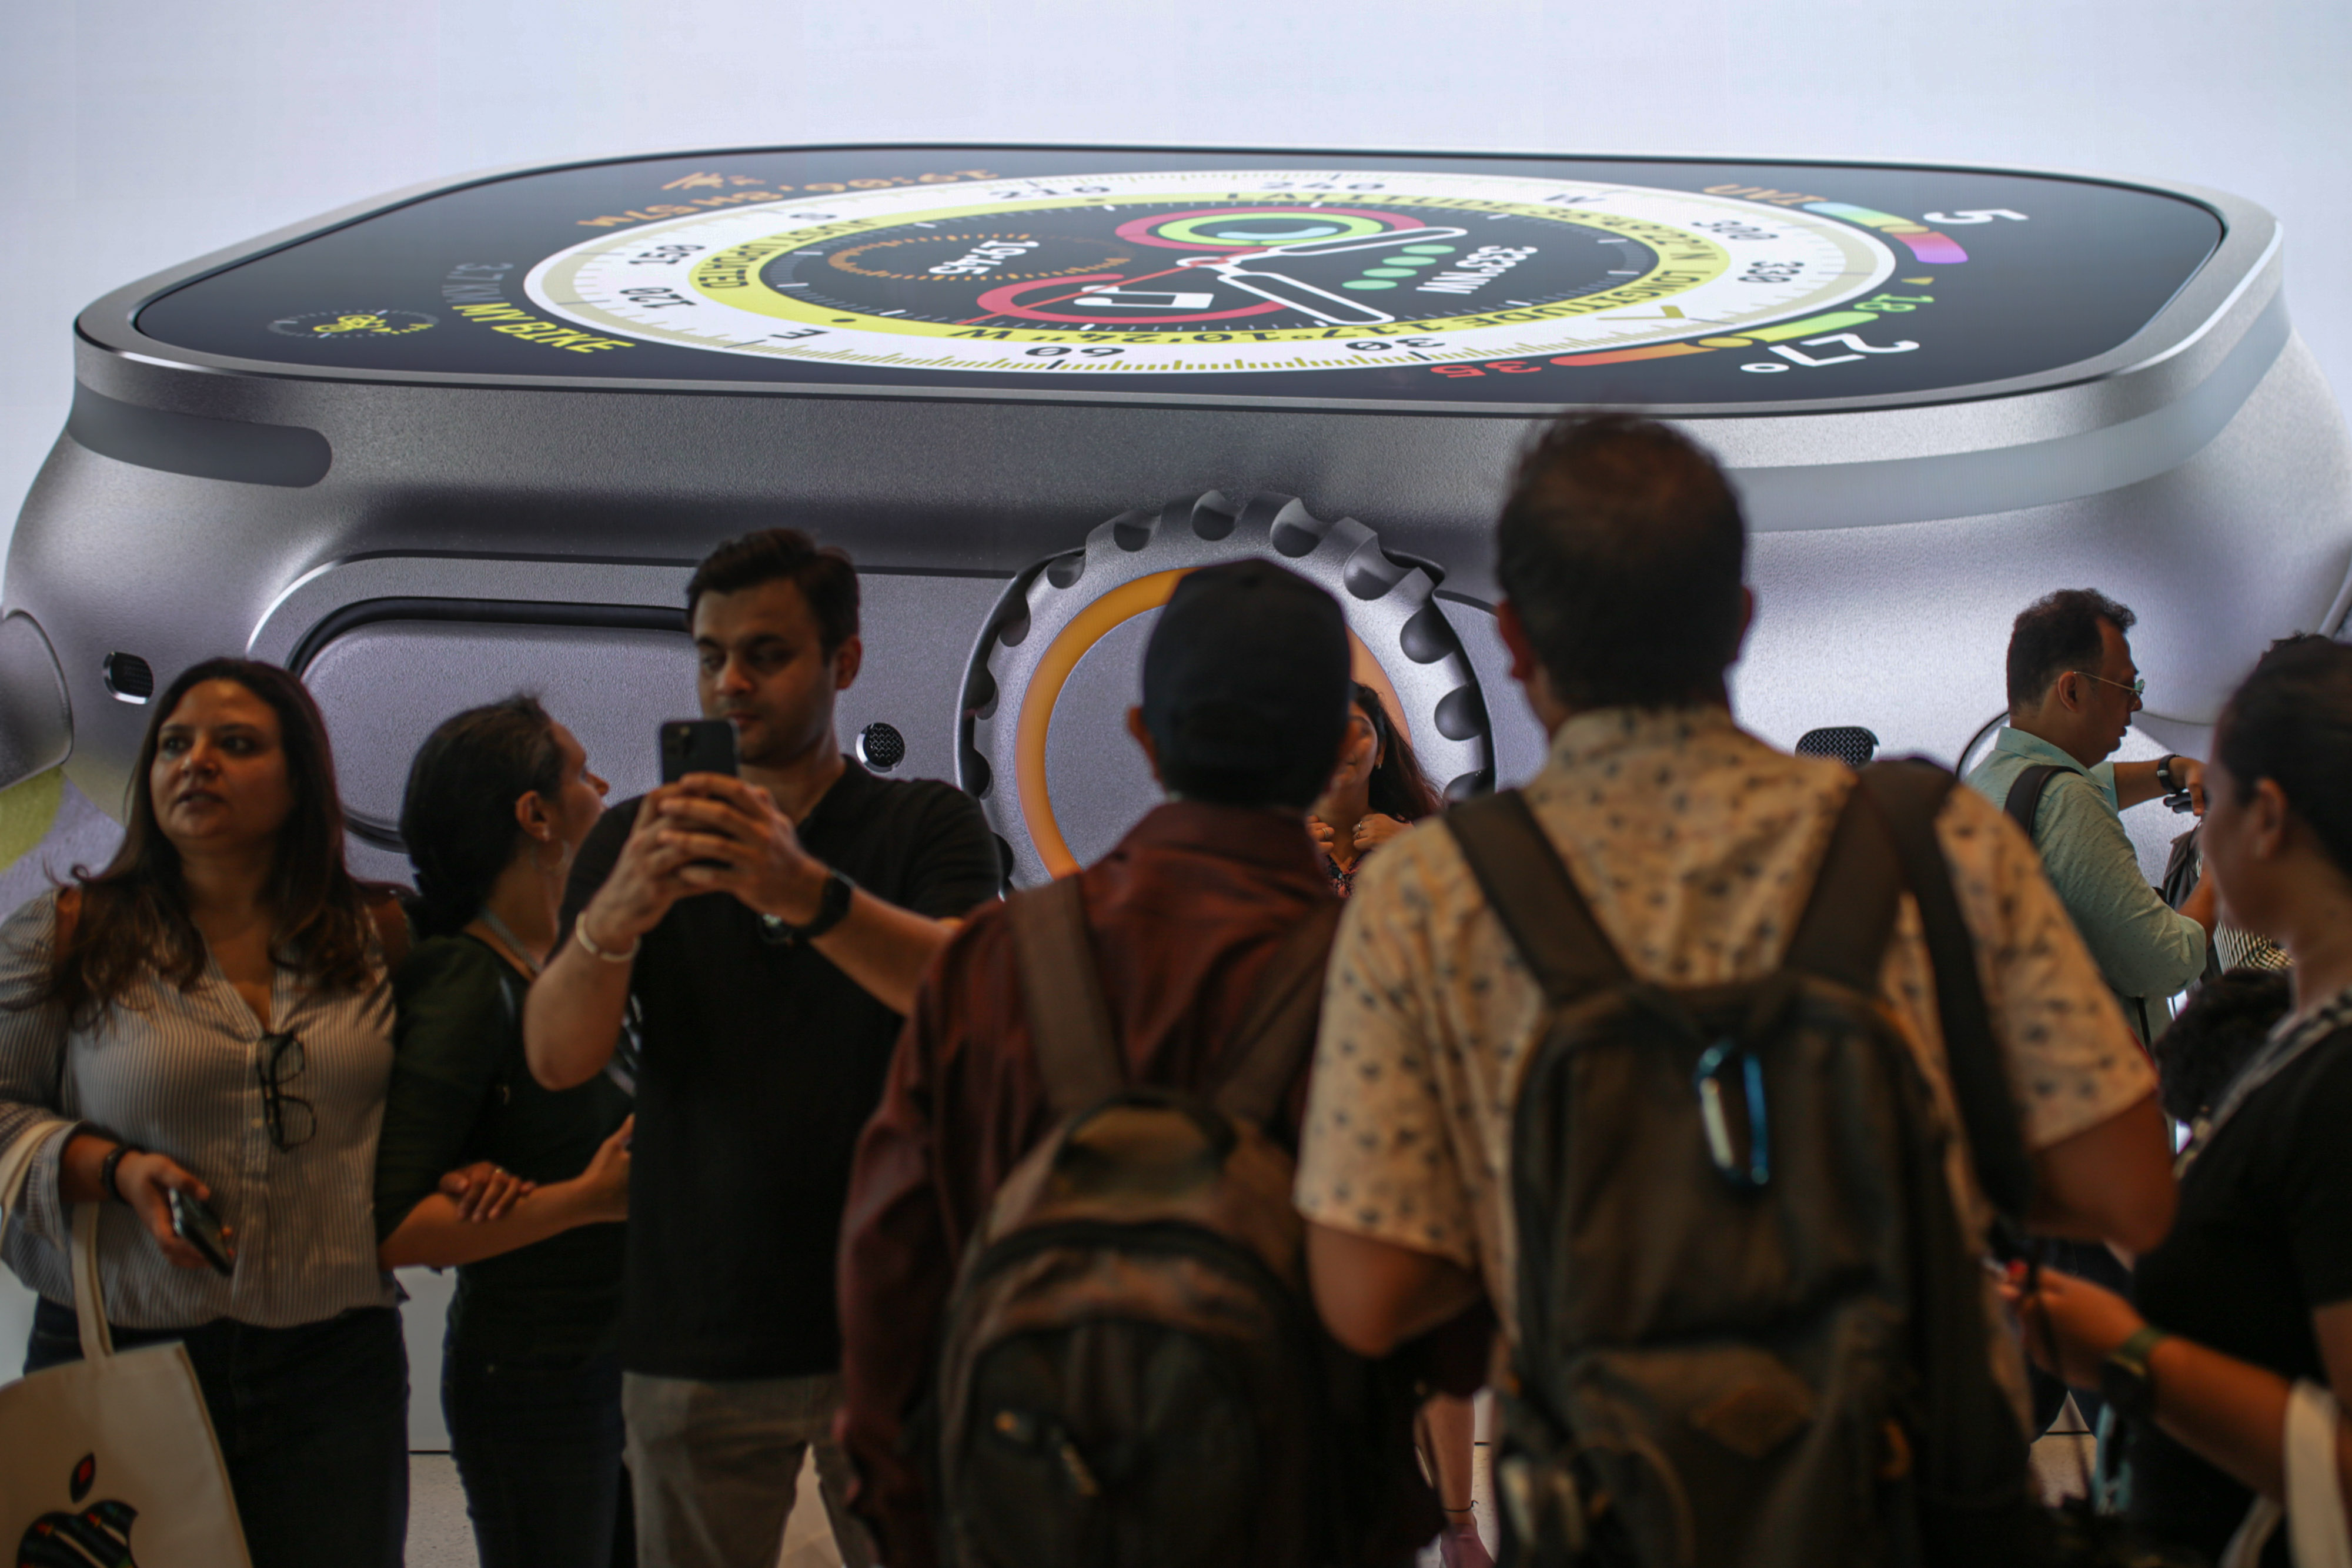 Apple Watch Ultra shown in the company’s new Mumbai retail store.